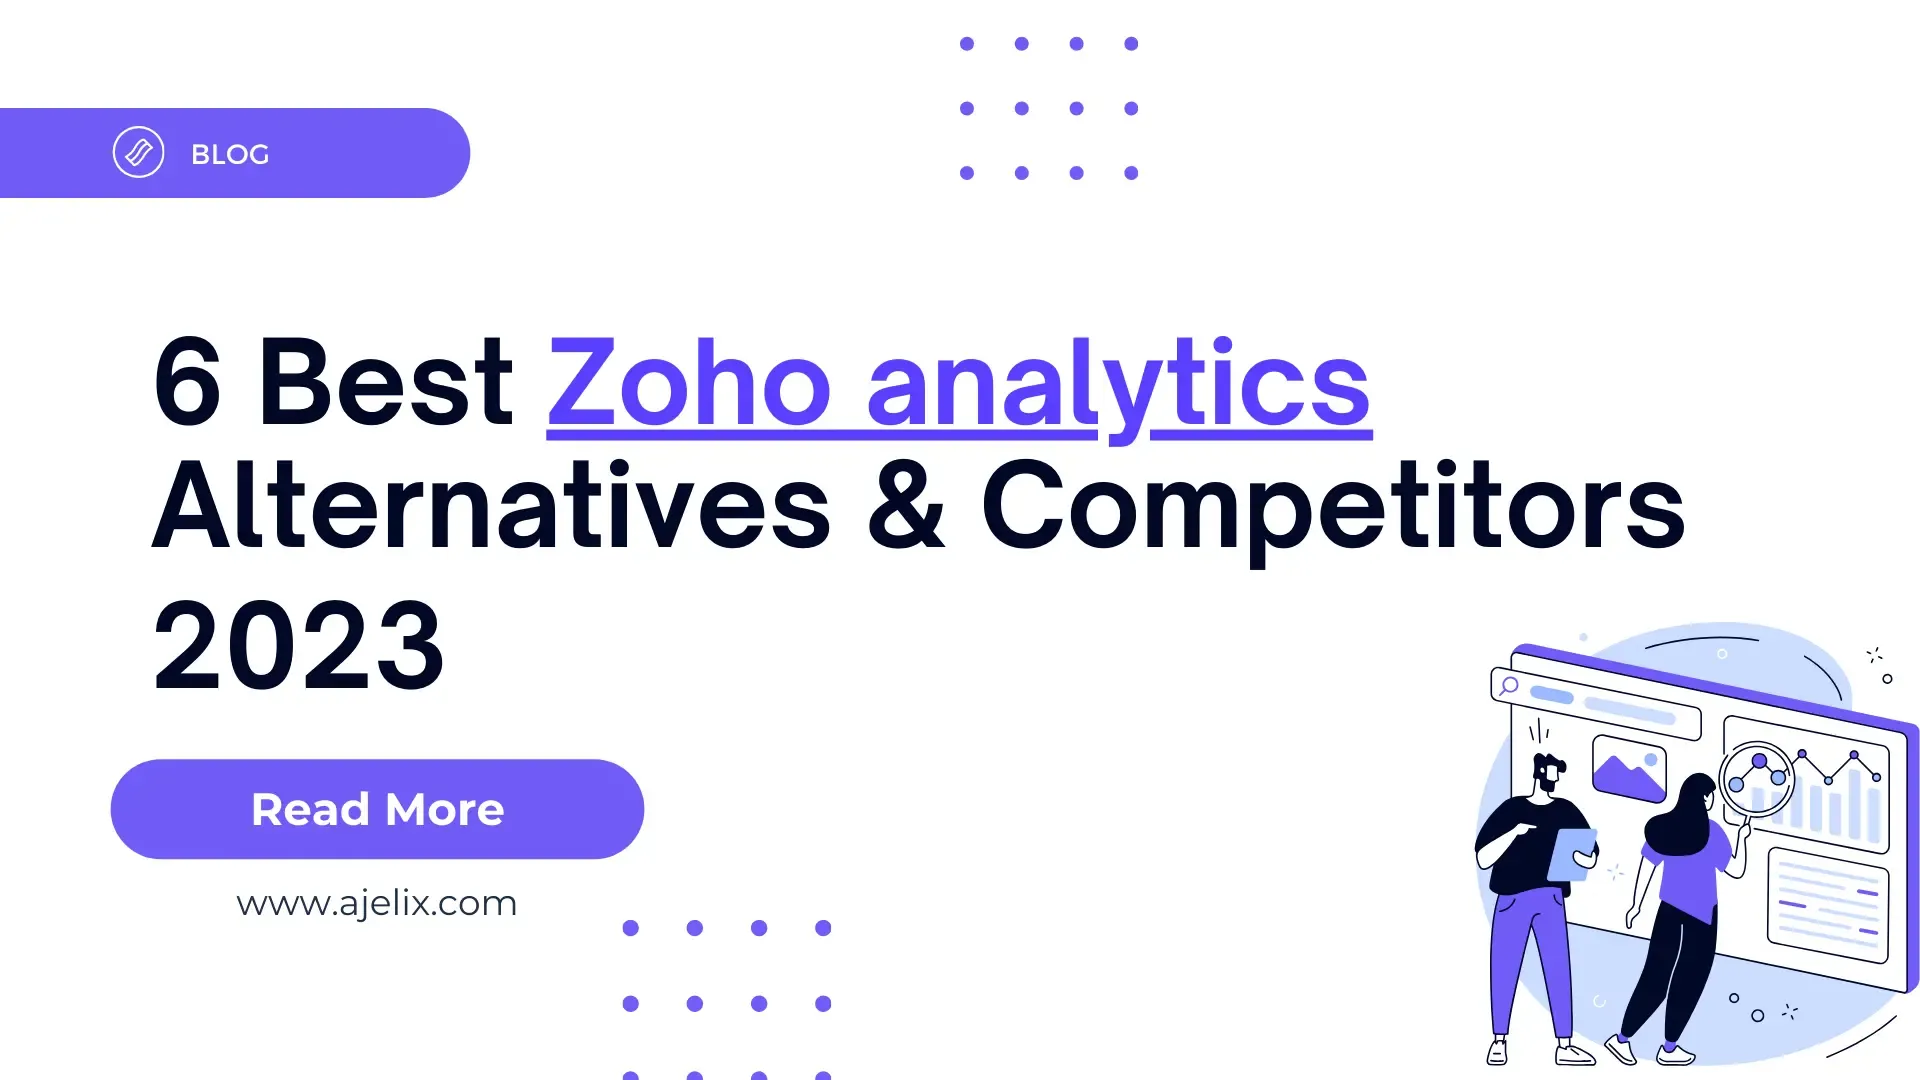 6 Best zoho analytics alternatives and competitors for 2023